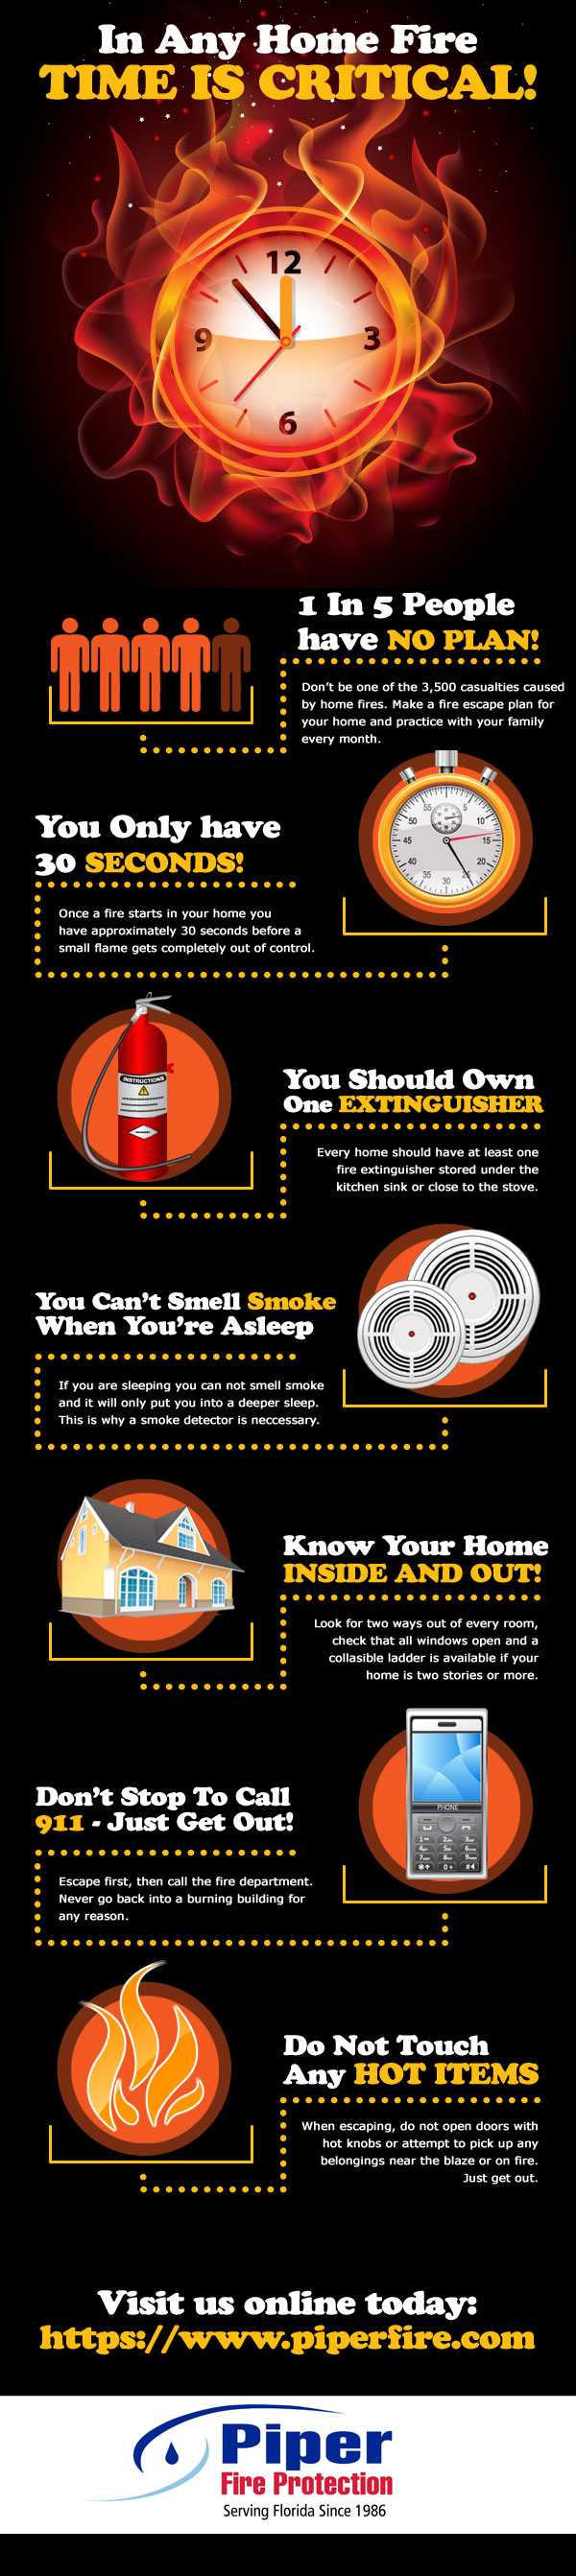 In any home fire time is critical